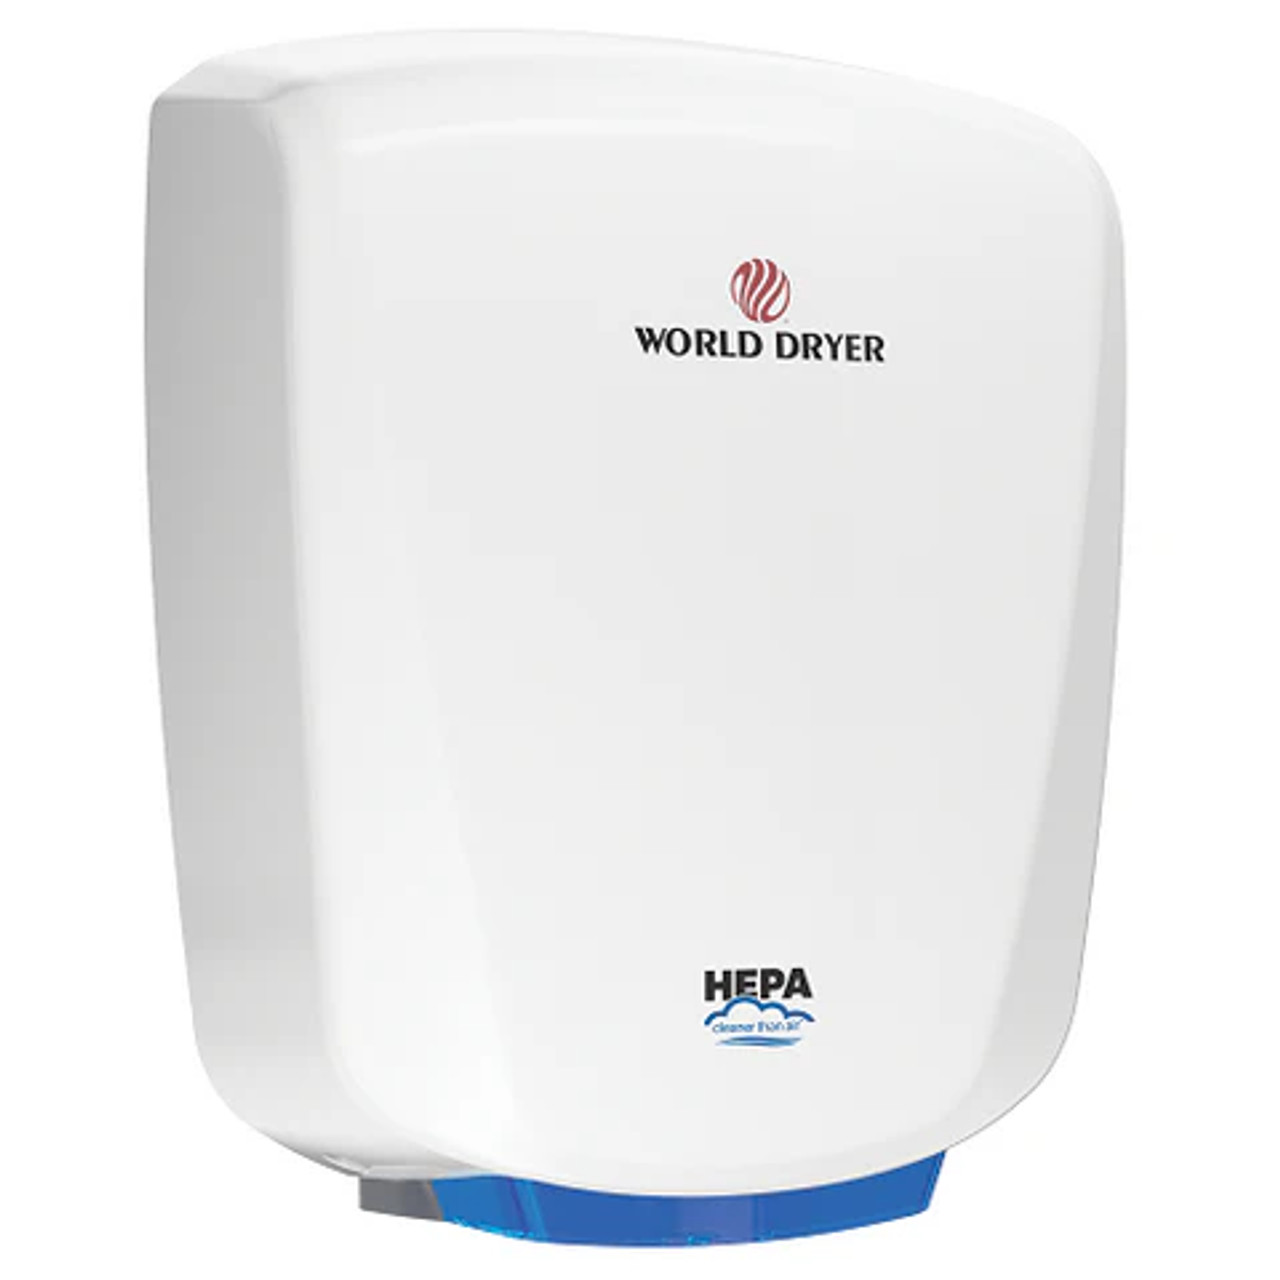 World Dryer Automatic Hand Dryer - 12 Second Dry Time, White Aluminum - Chicken Pieces